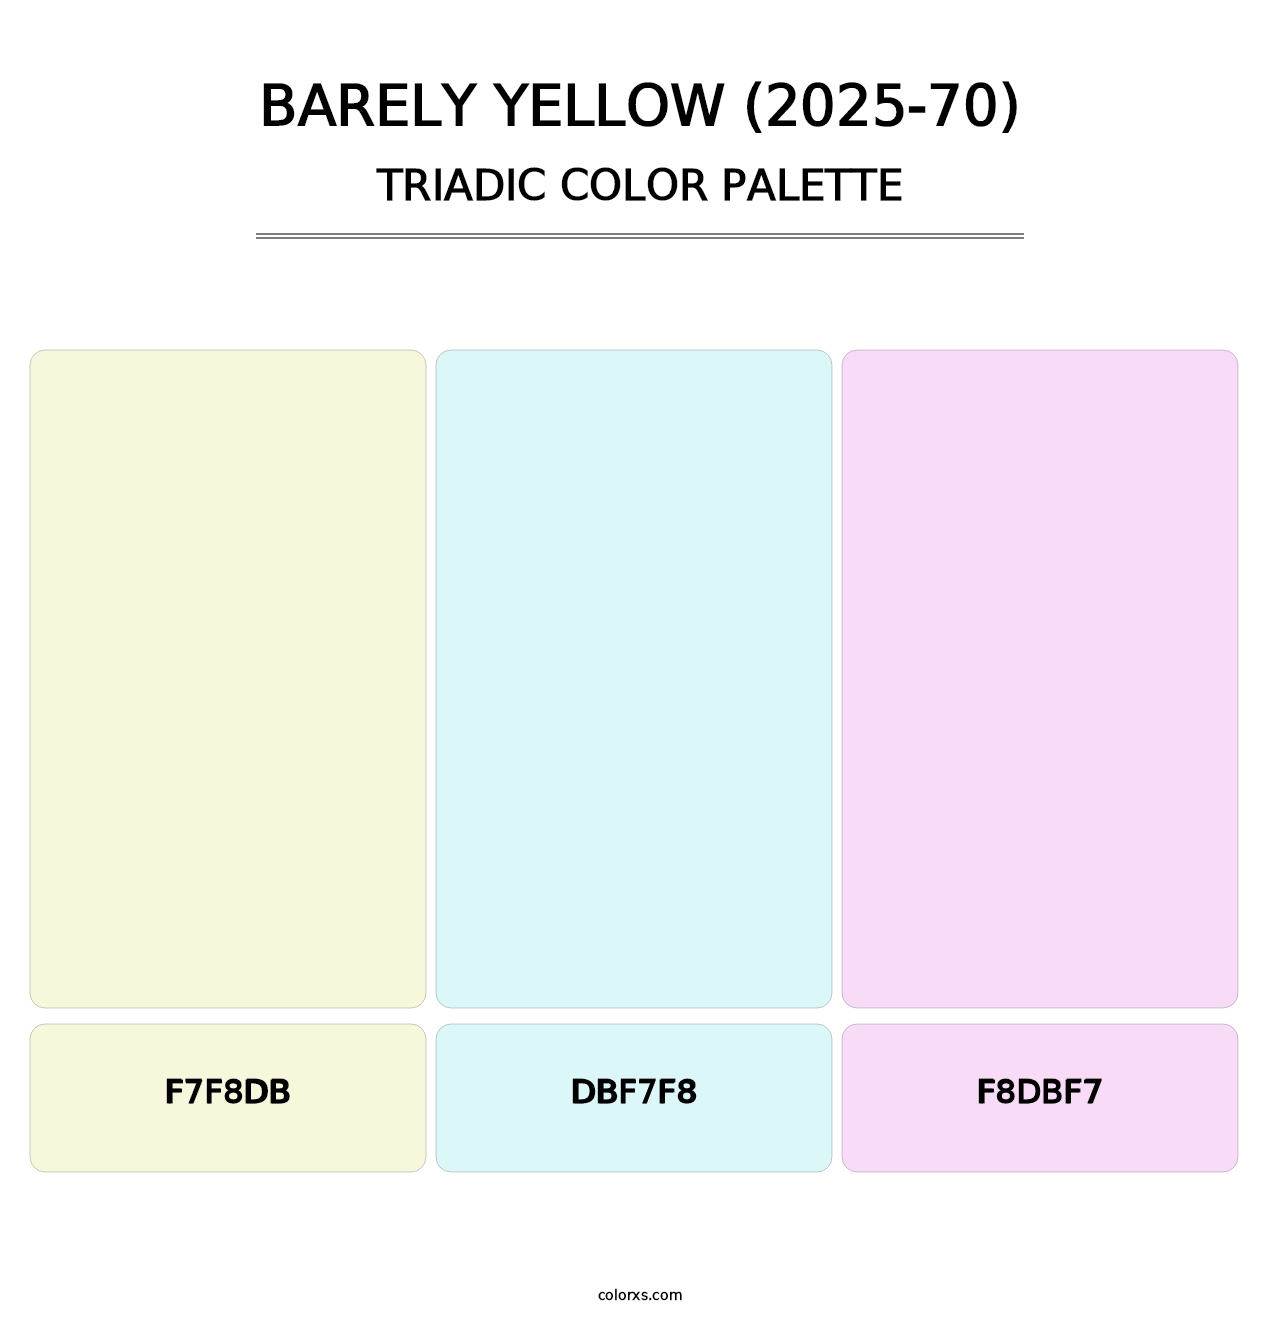 Barely Yellow (2025-70) - Triadic Color Palette